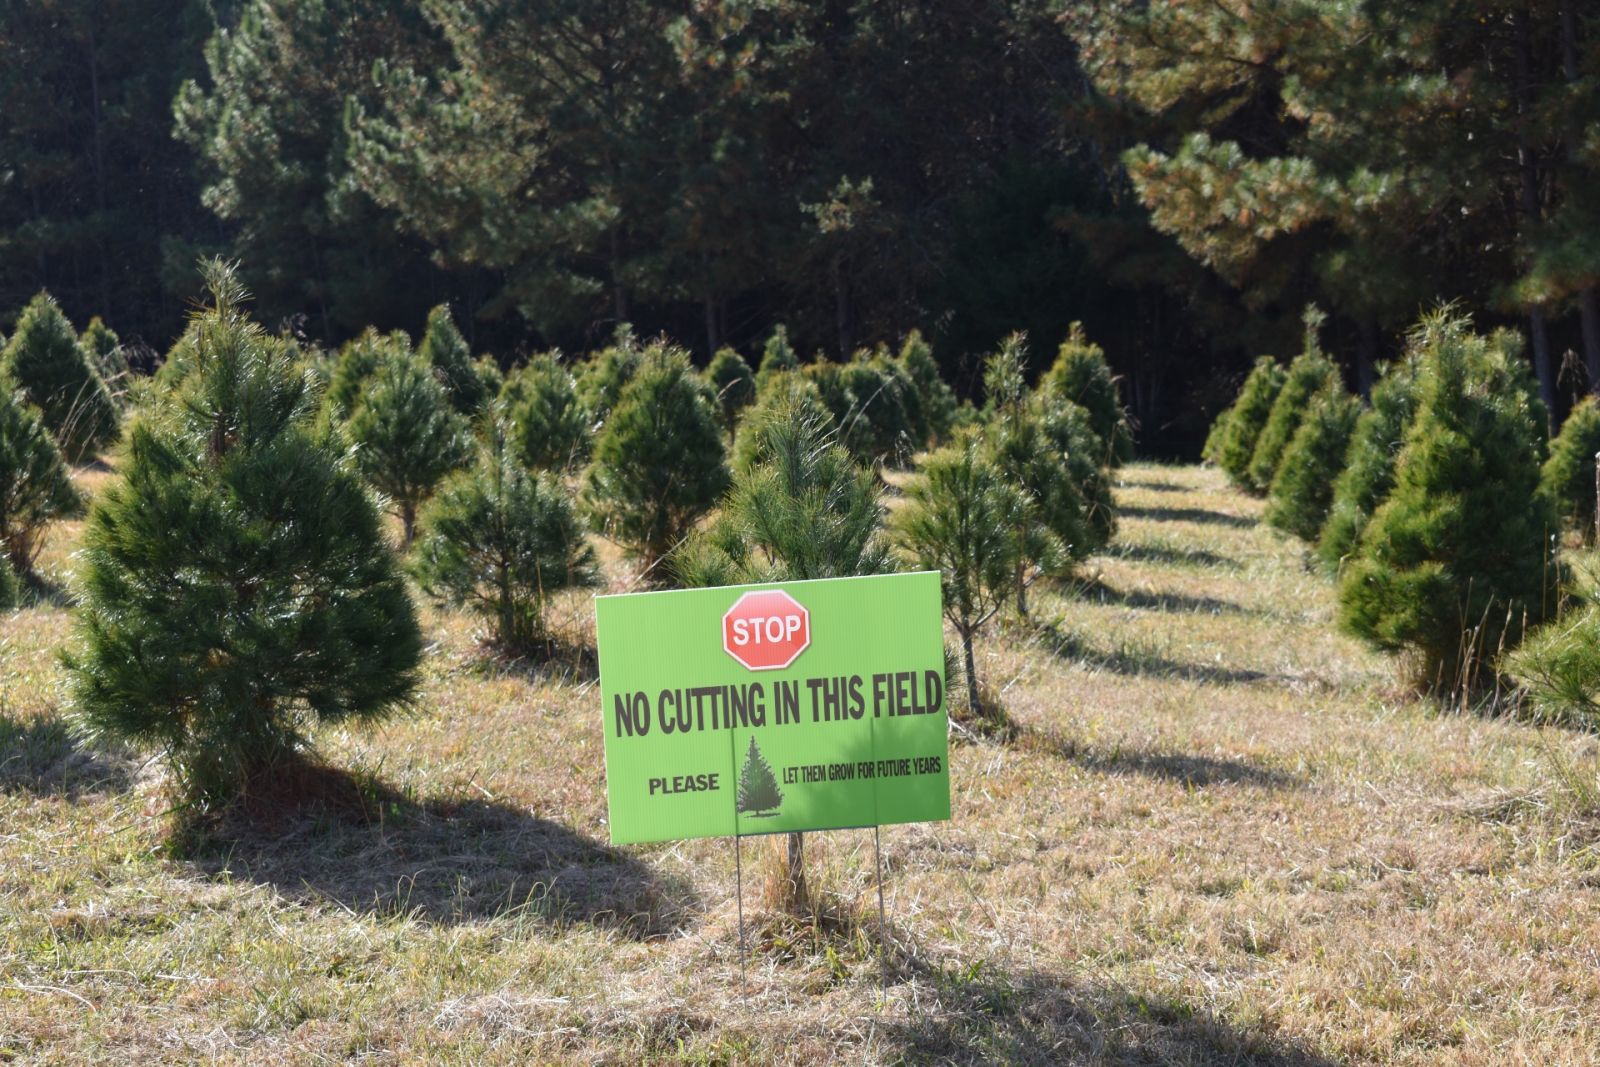 Stephen Steed of Merry Christmas Tree Farm partitions off certain fields, such as this pine plot, to allow for sustained growth. (Photo/Molly Hulsey)